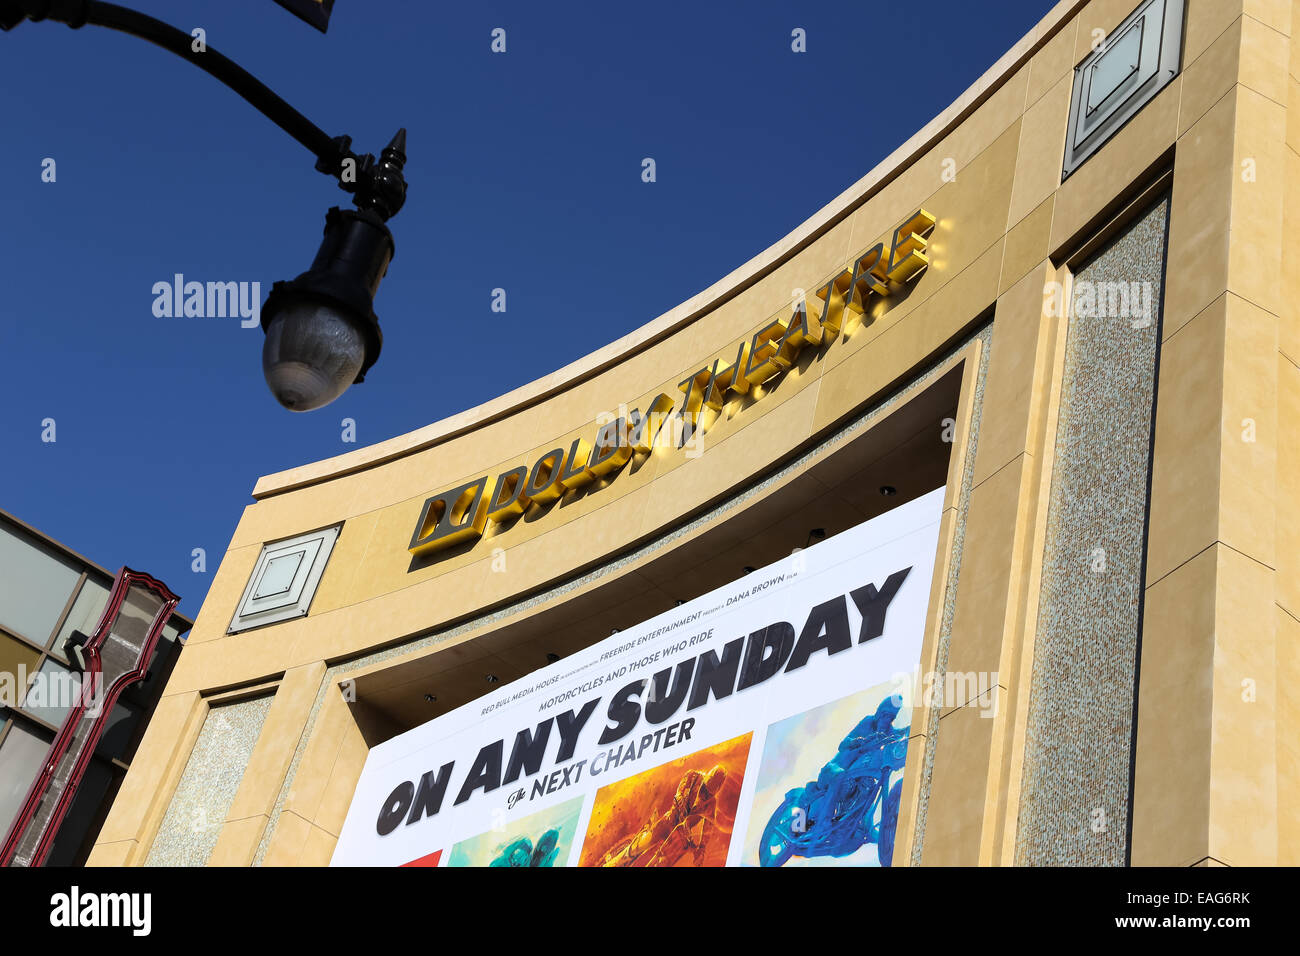 Dolby Theater in Hollywood, Los Angeles, Kalifornien Stockfoto